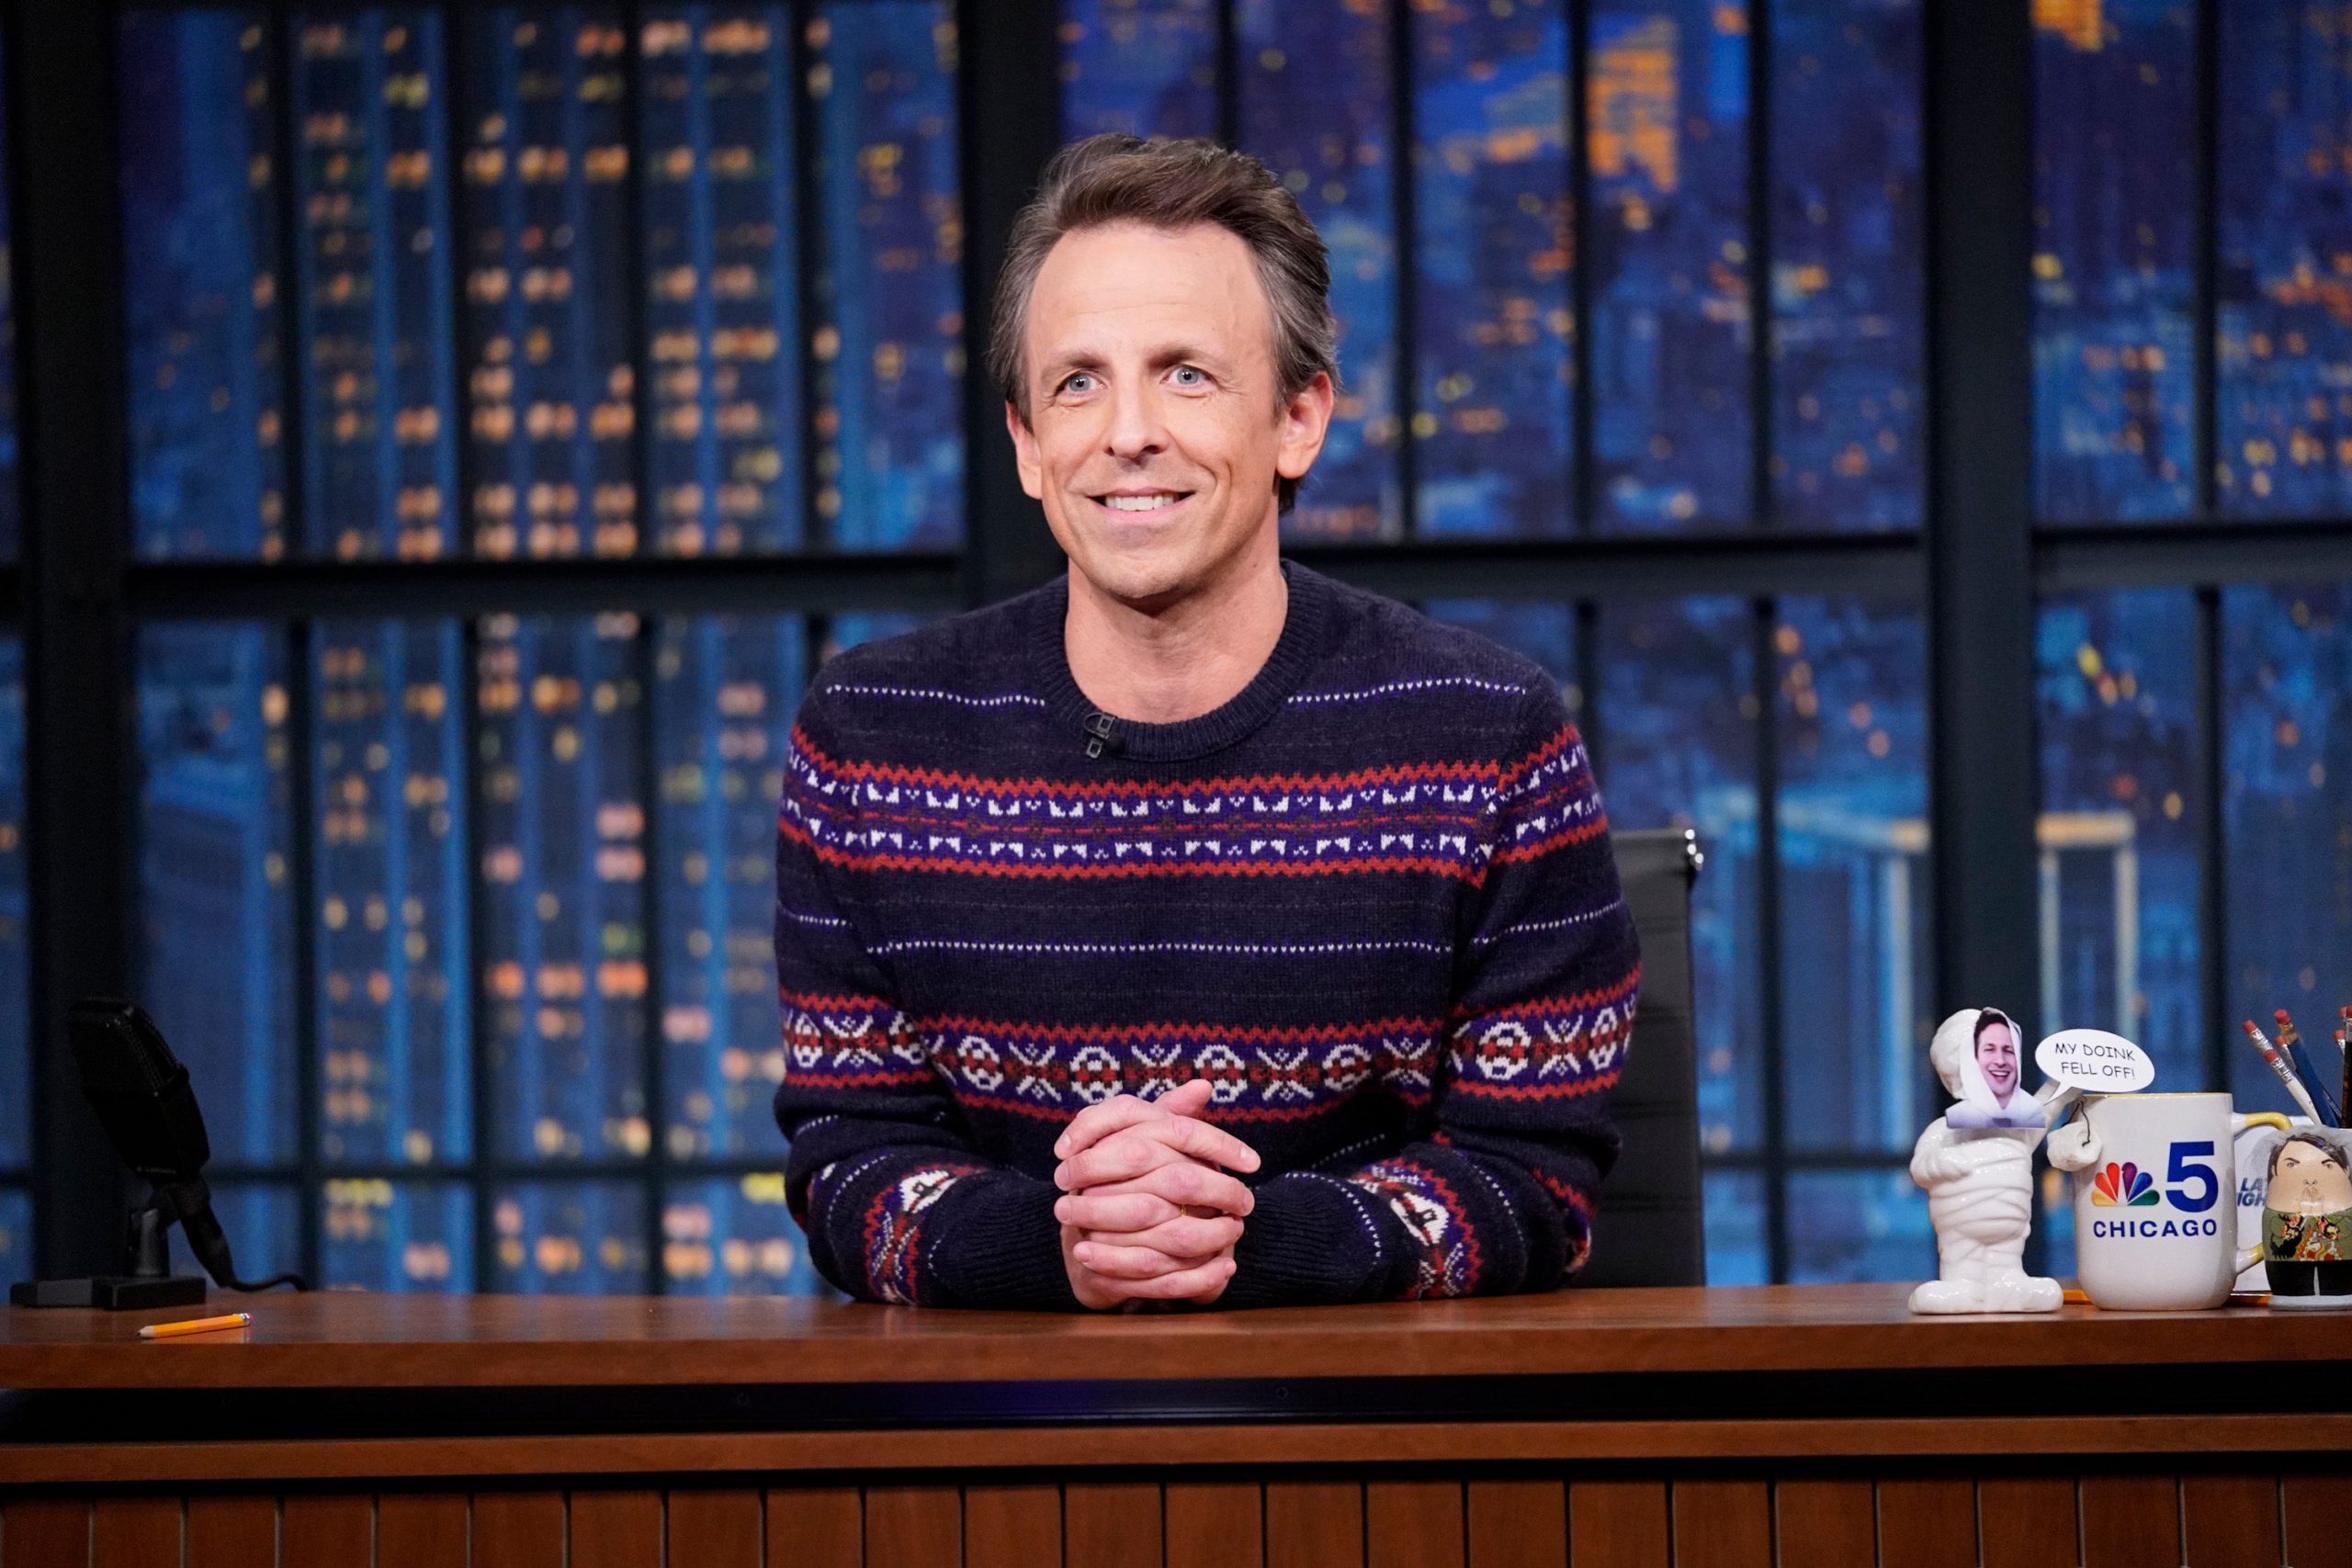 ‘Late Night’ host Seth Meyers contracts COVID-19, TV show scrapped this week